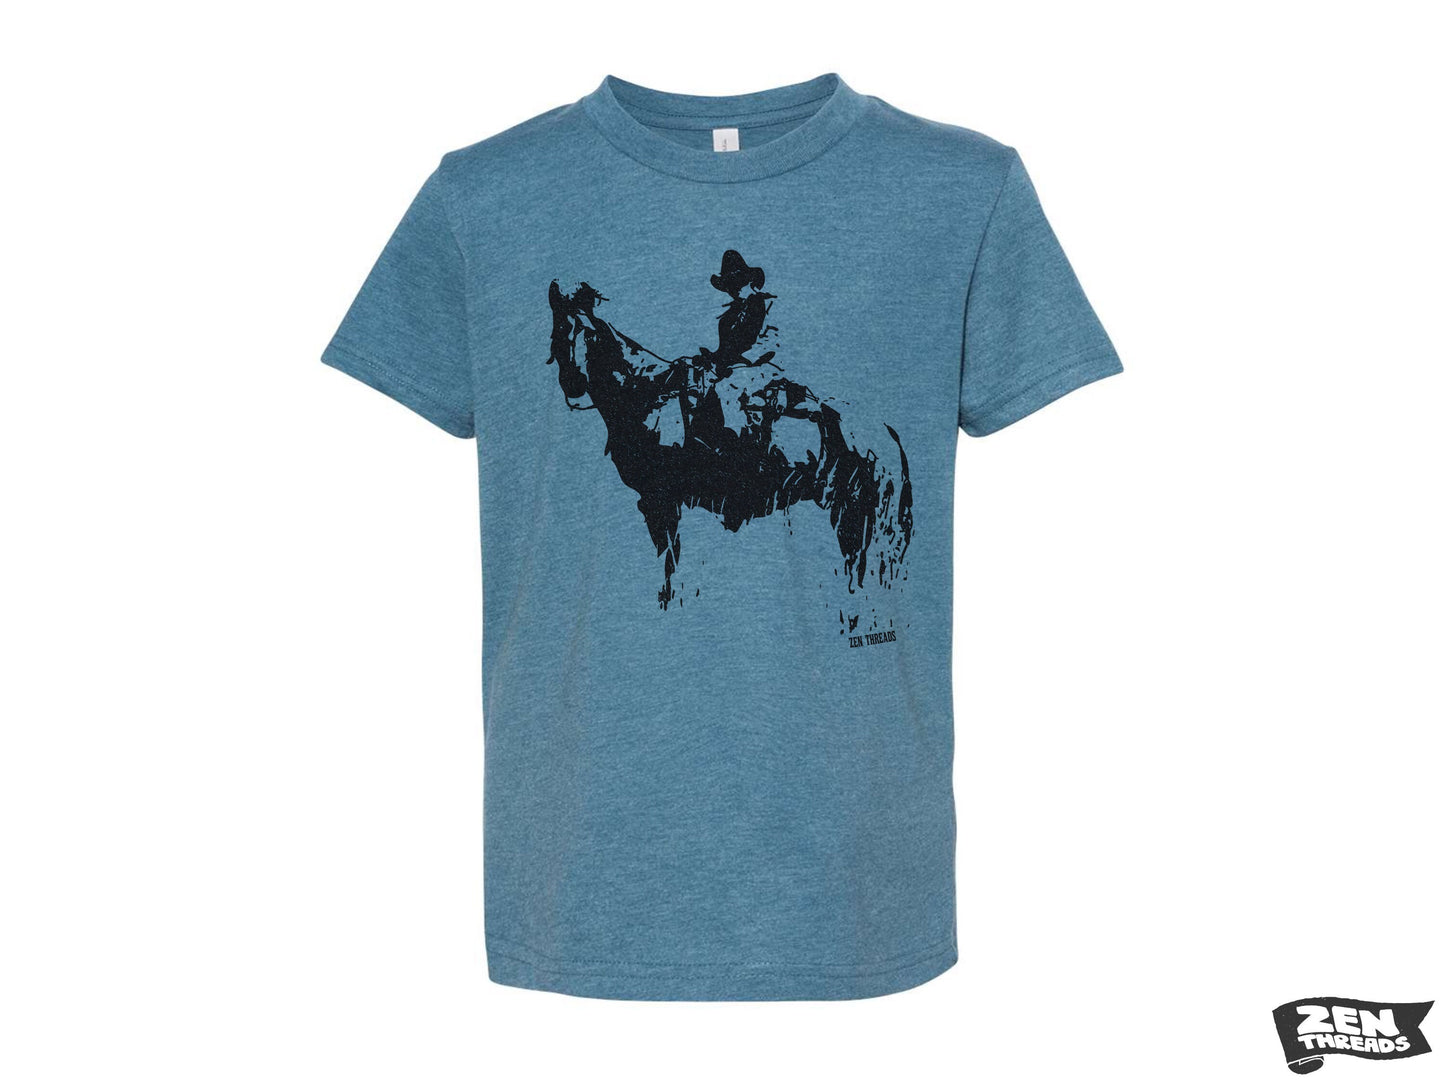 Kids COWBOY and Horse Premium vintage soft Tee T-Shirt Fine Jersey T-Shirt (+Colors) zen threads texas Wild West western youth toddler